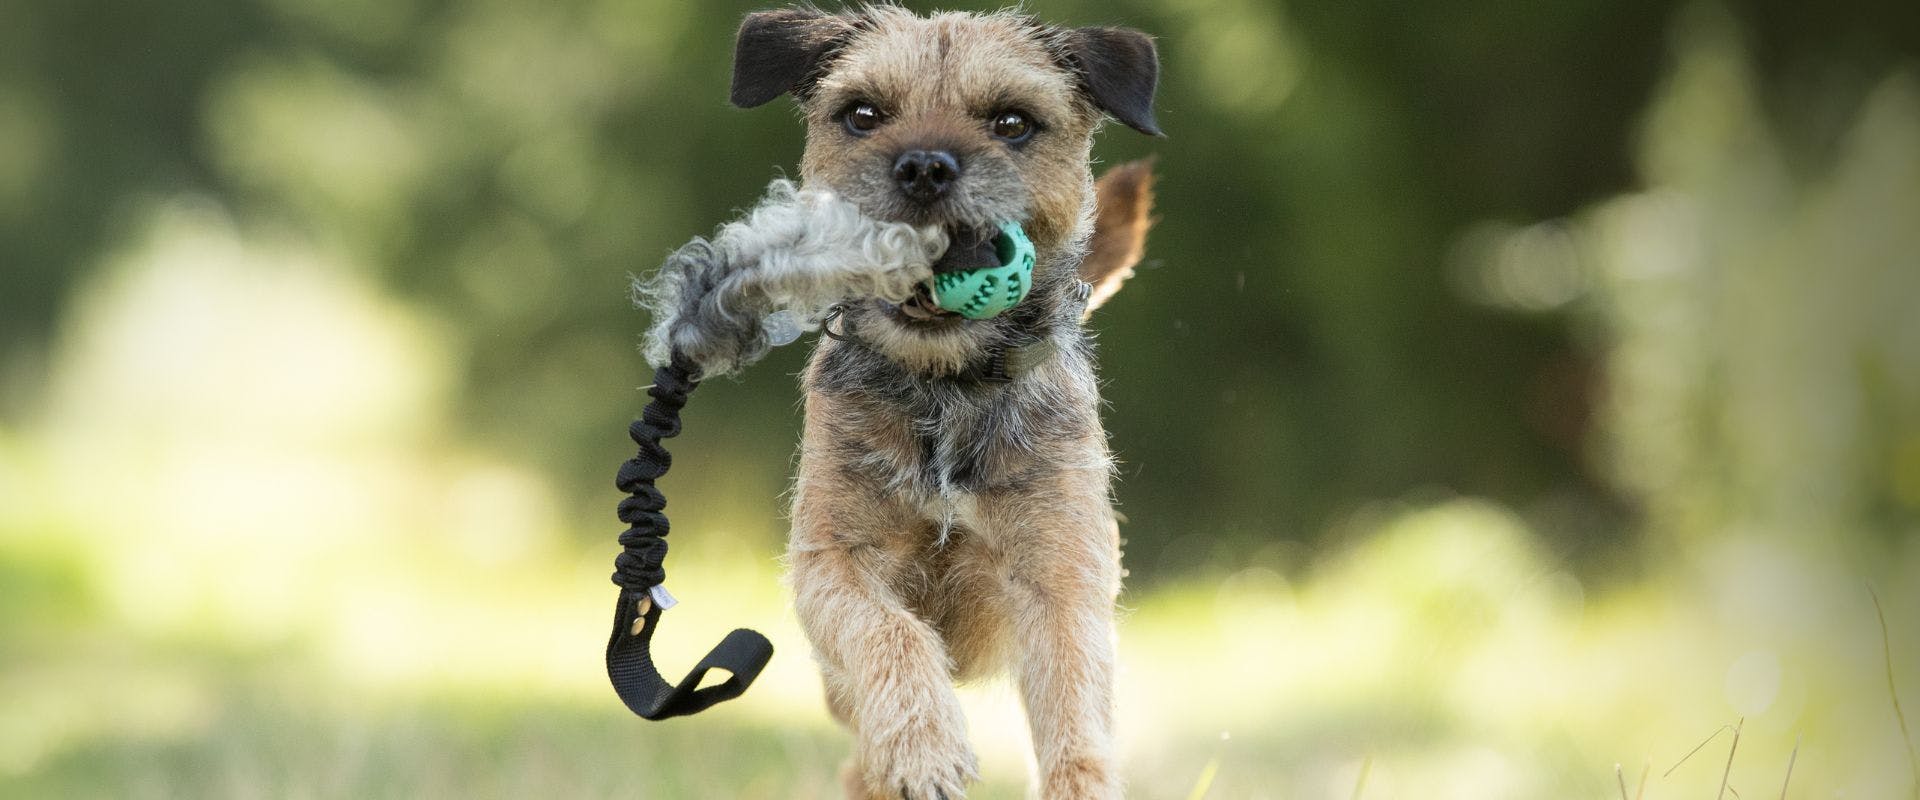 Border Terrier running with a toy in their mouth